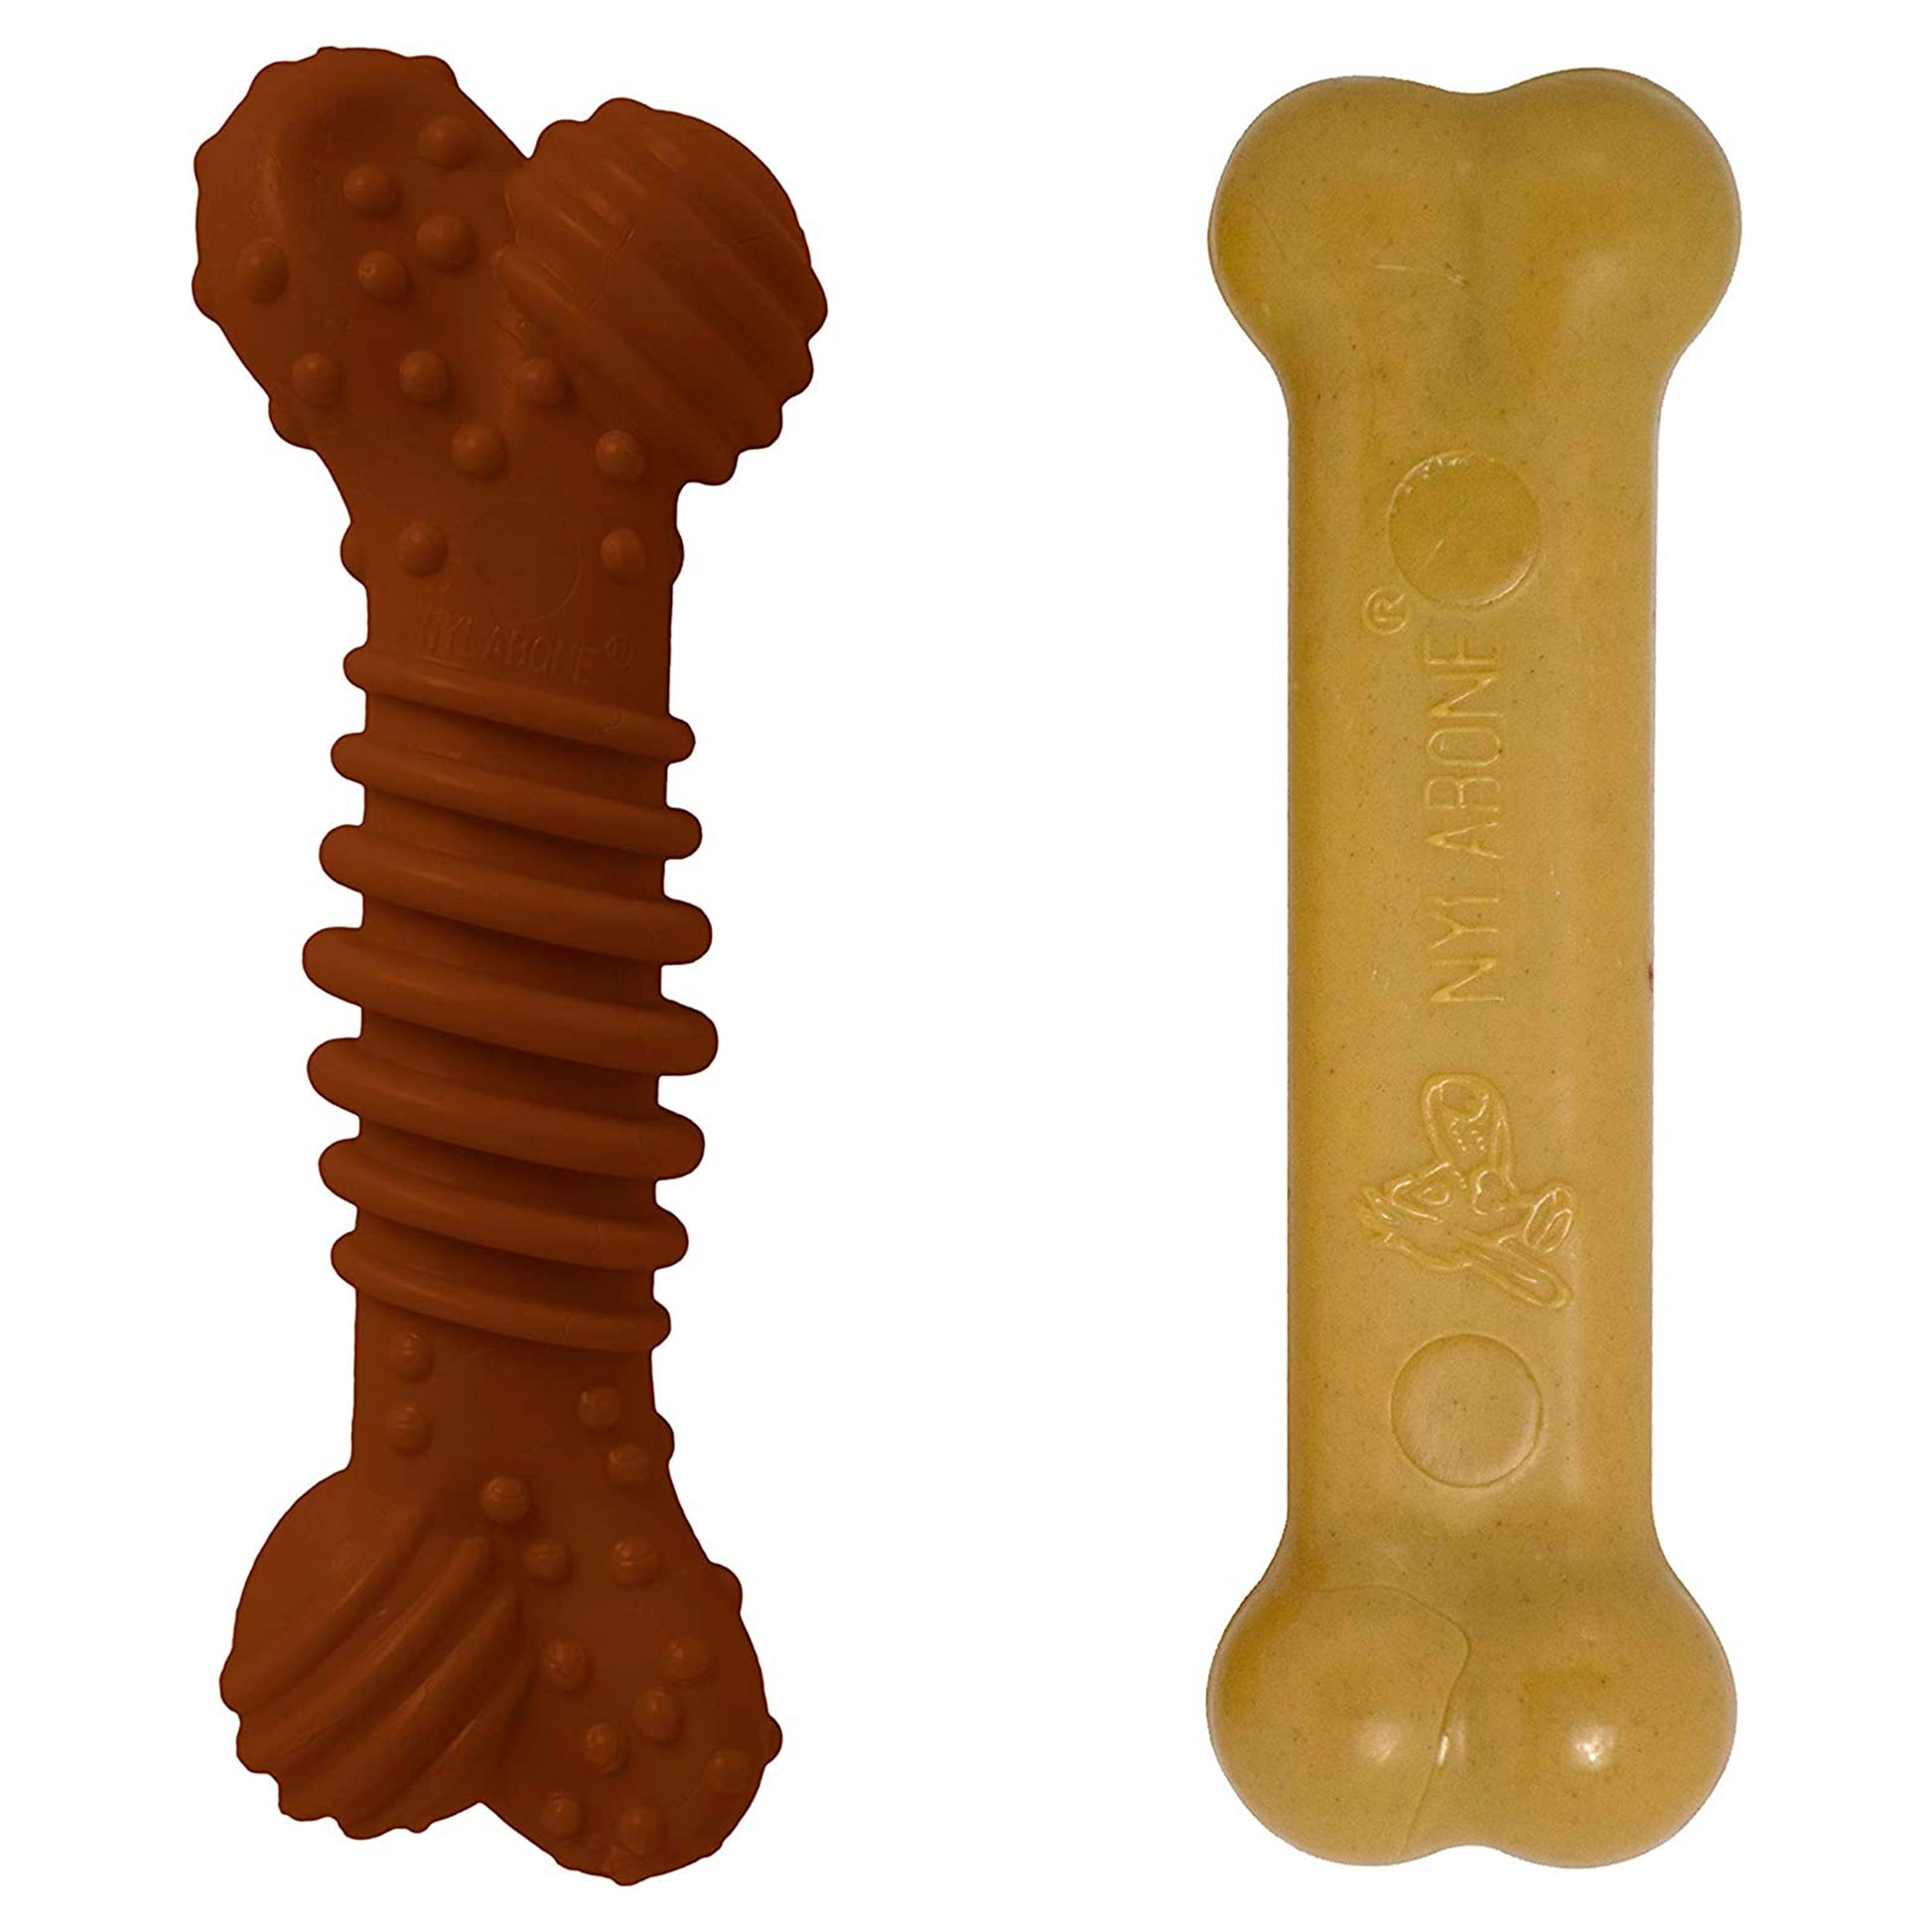 Nylabone Power Chew Durable Dog Chew Toys Twin Pack Flavor Medley & Peanut Butter Flavor Small/Regular - Up To 25 lb, Nylabone